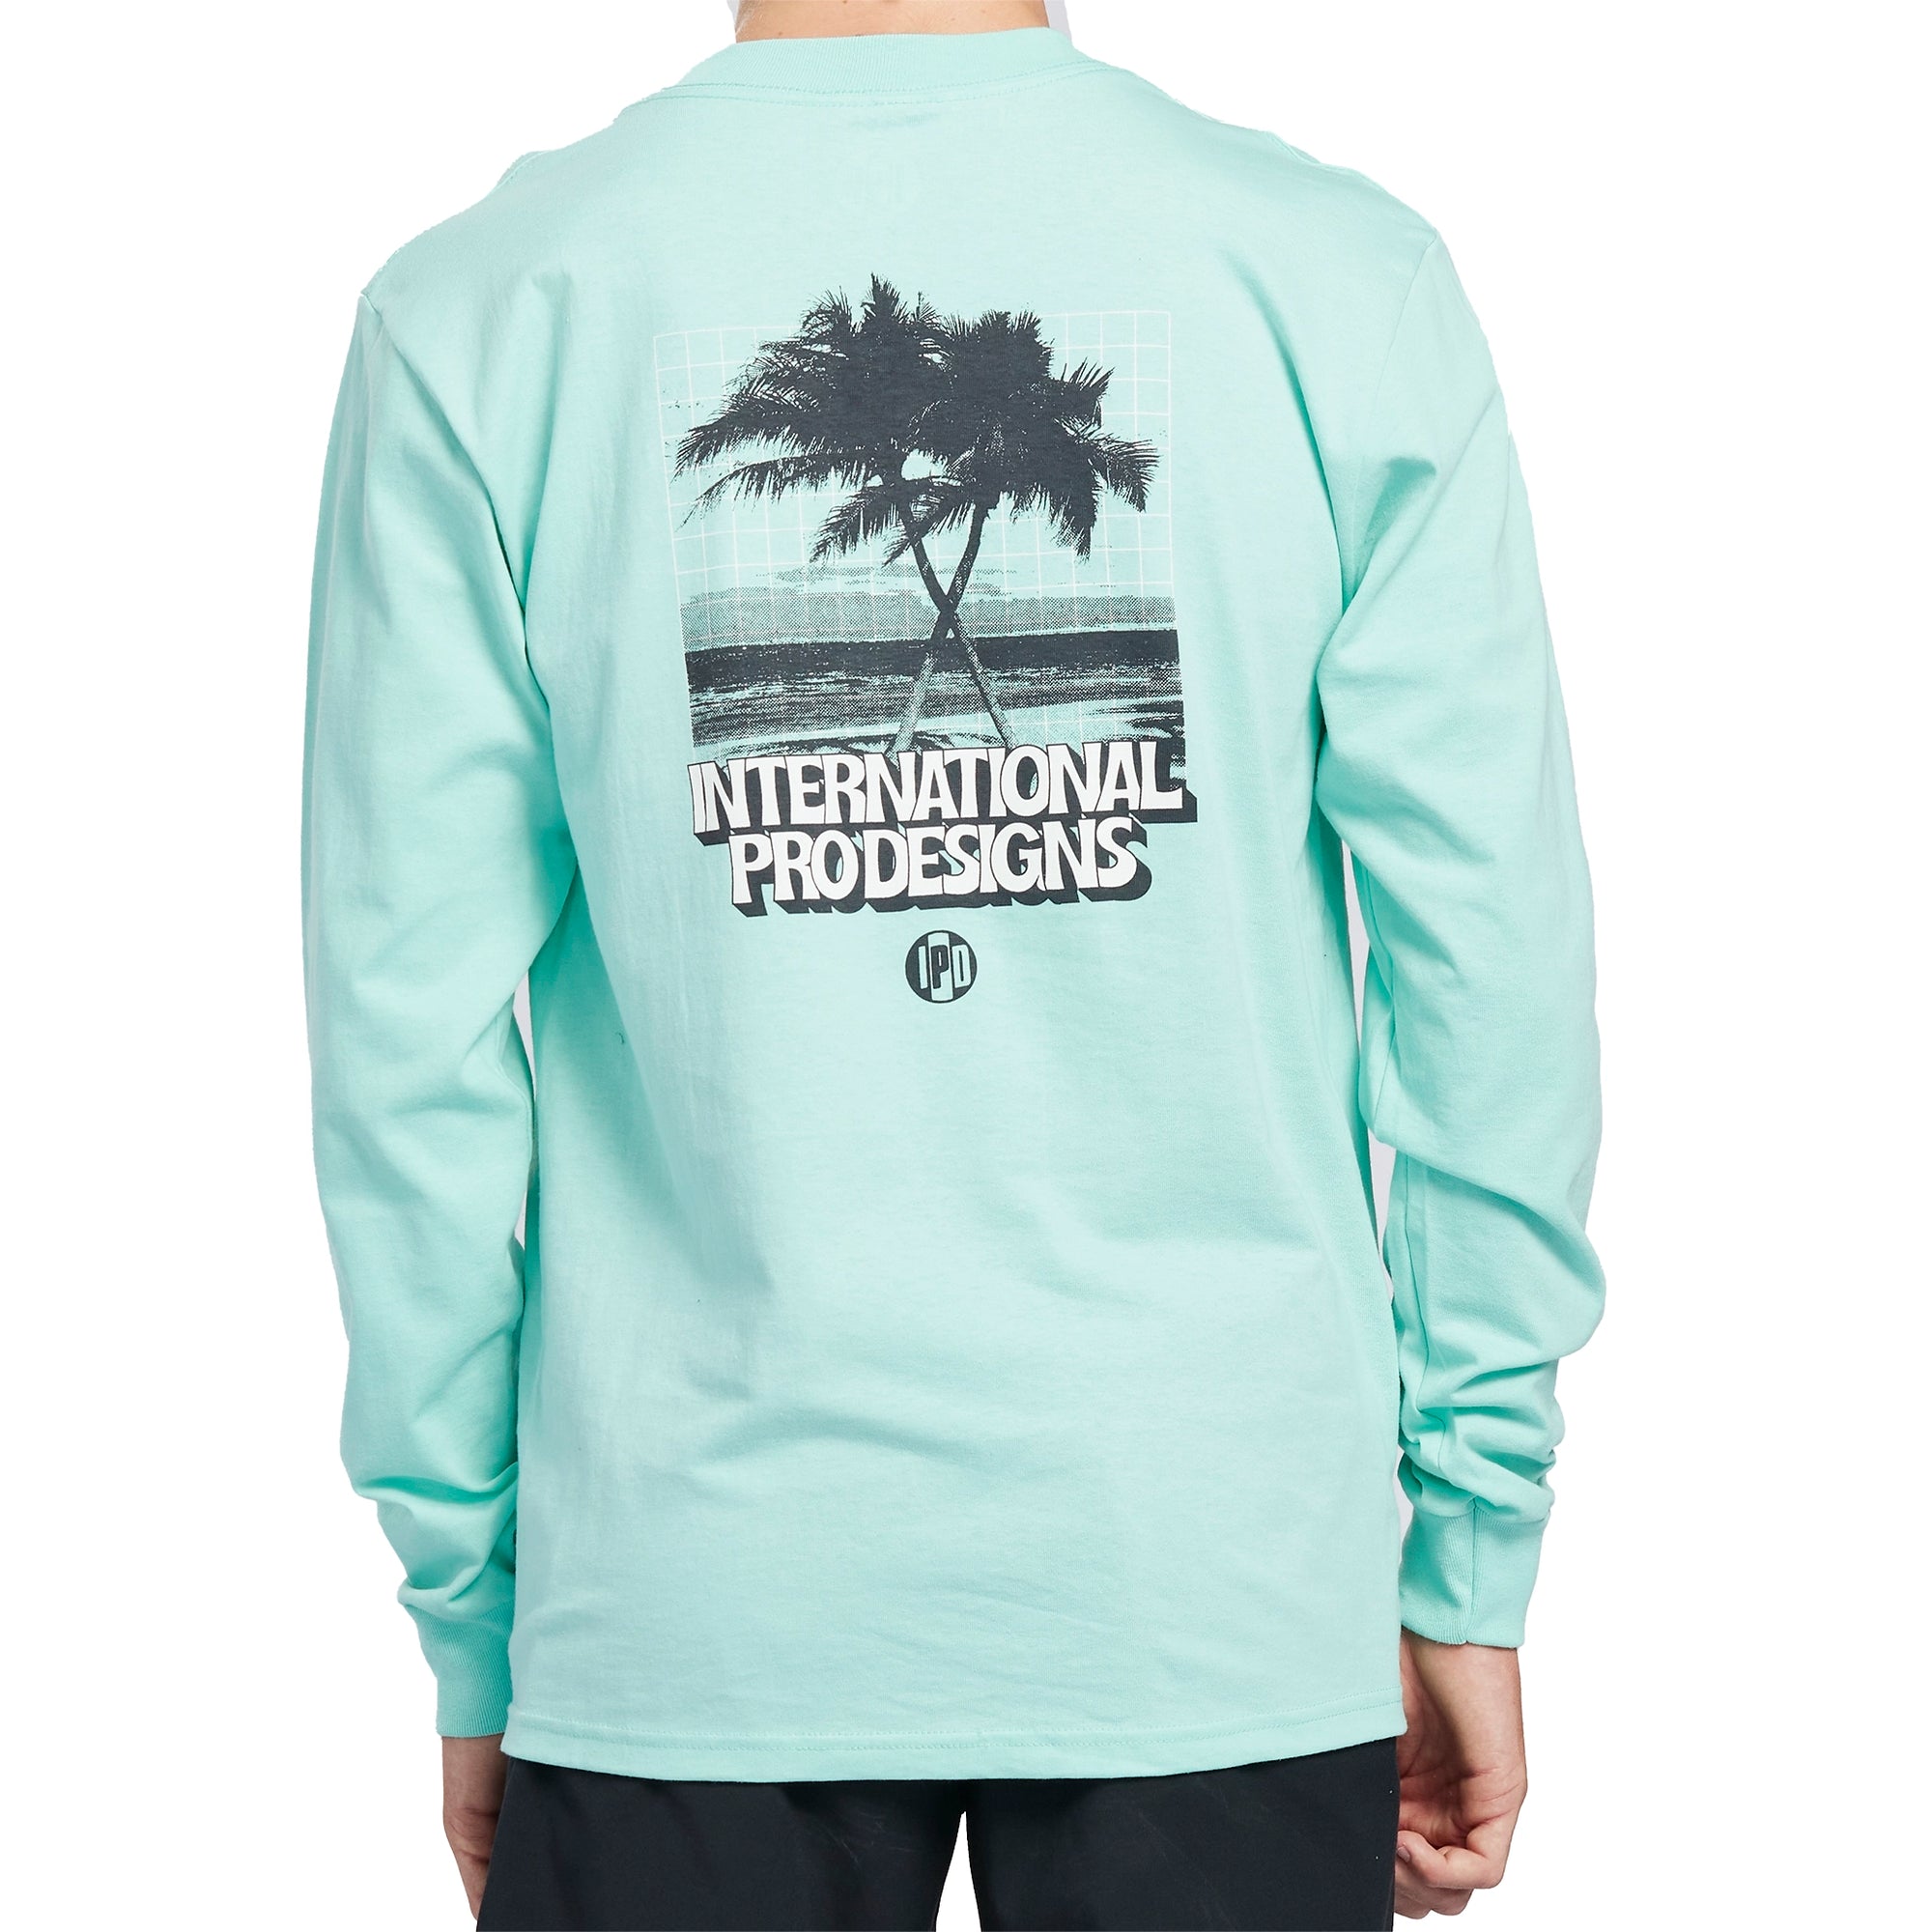 Vintage white long sleeve tee with a print of crossing palm trees on a beach on the back.